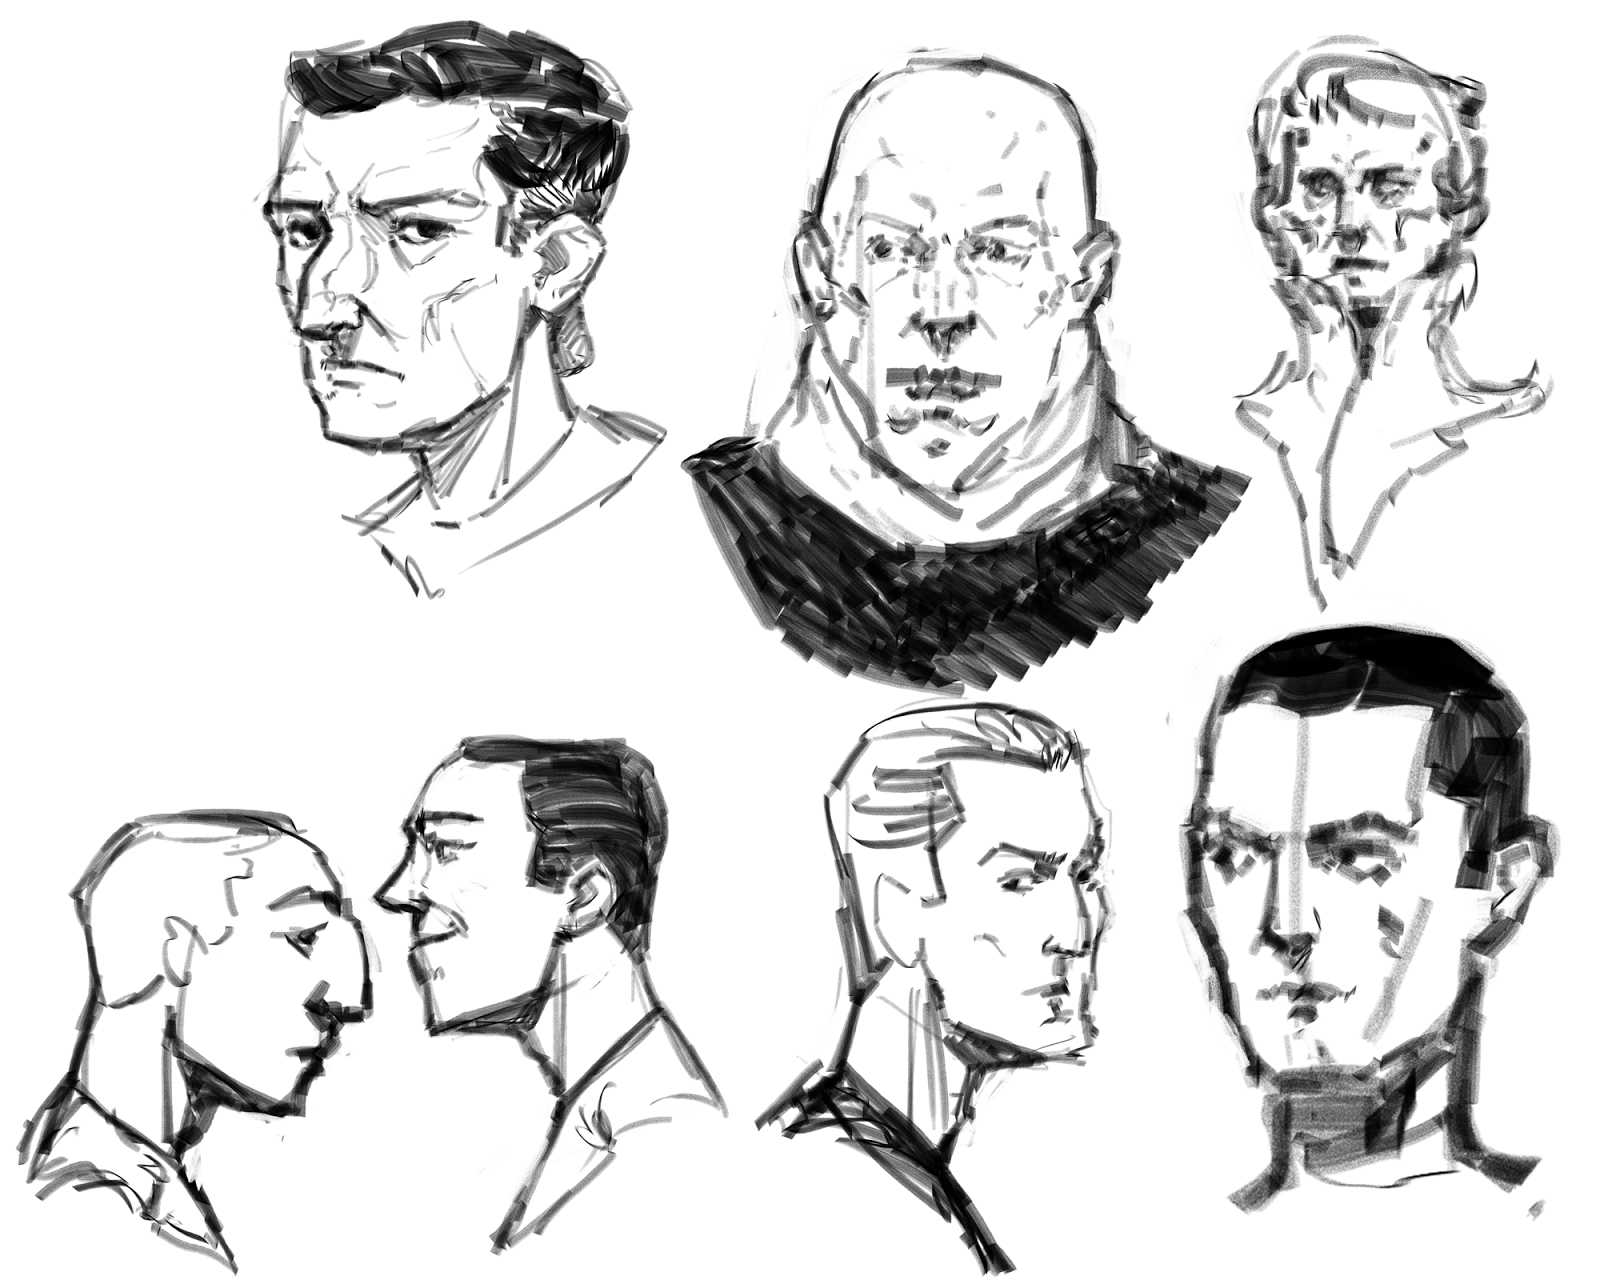 [Image: 2016_06_19_sketches.PNG]